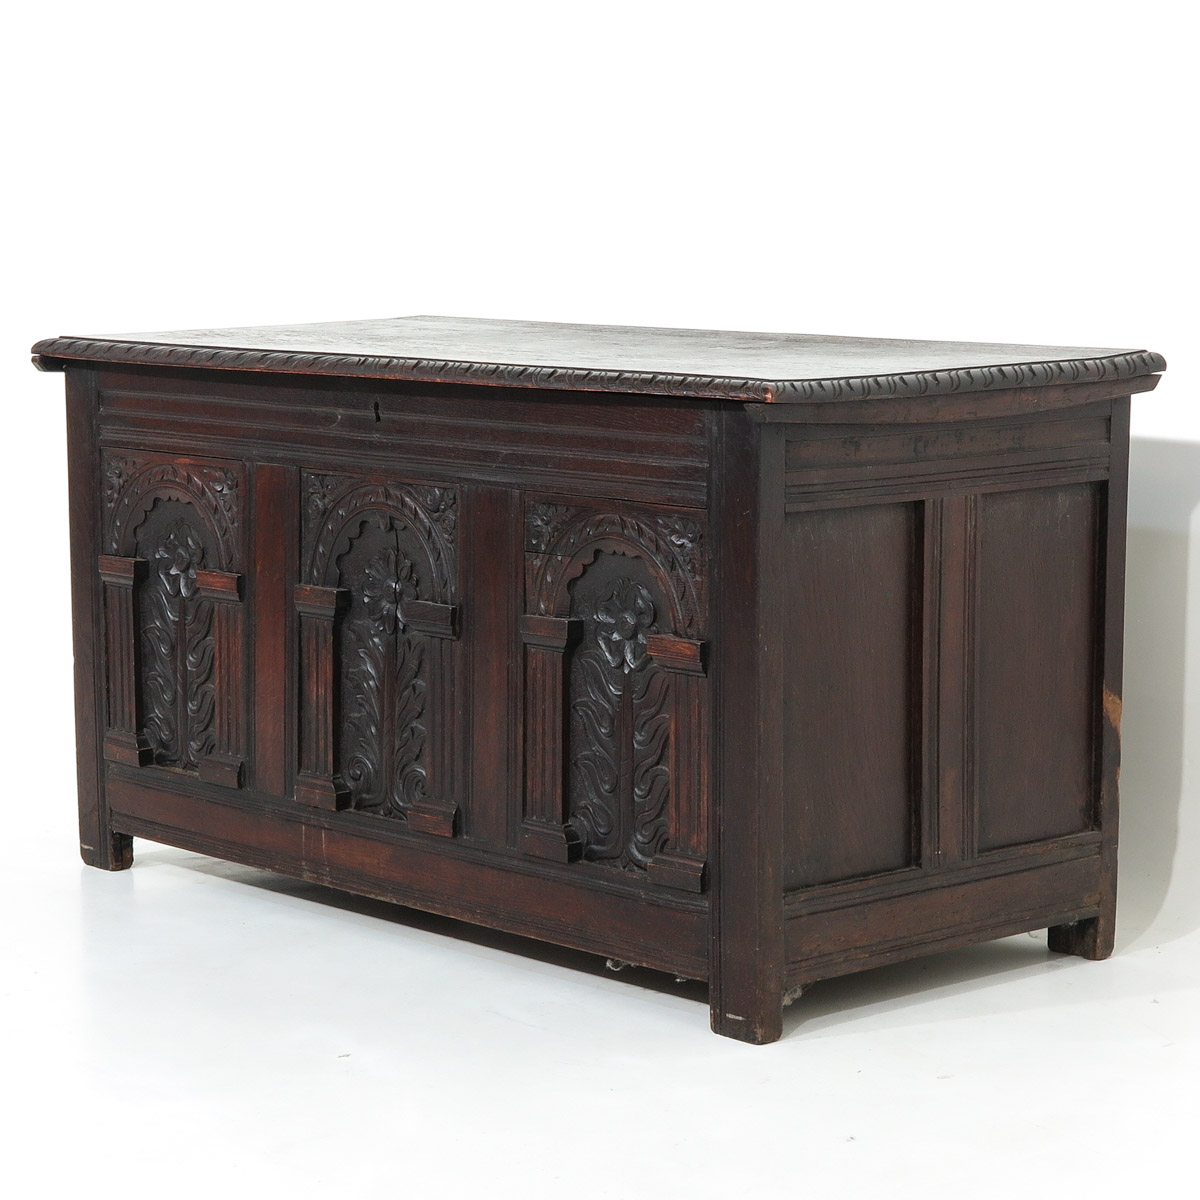 An 18th Century Oak Cabinet - Image 3 of 10